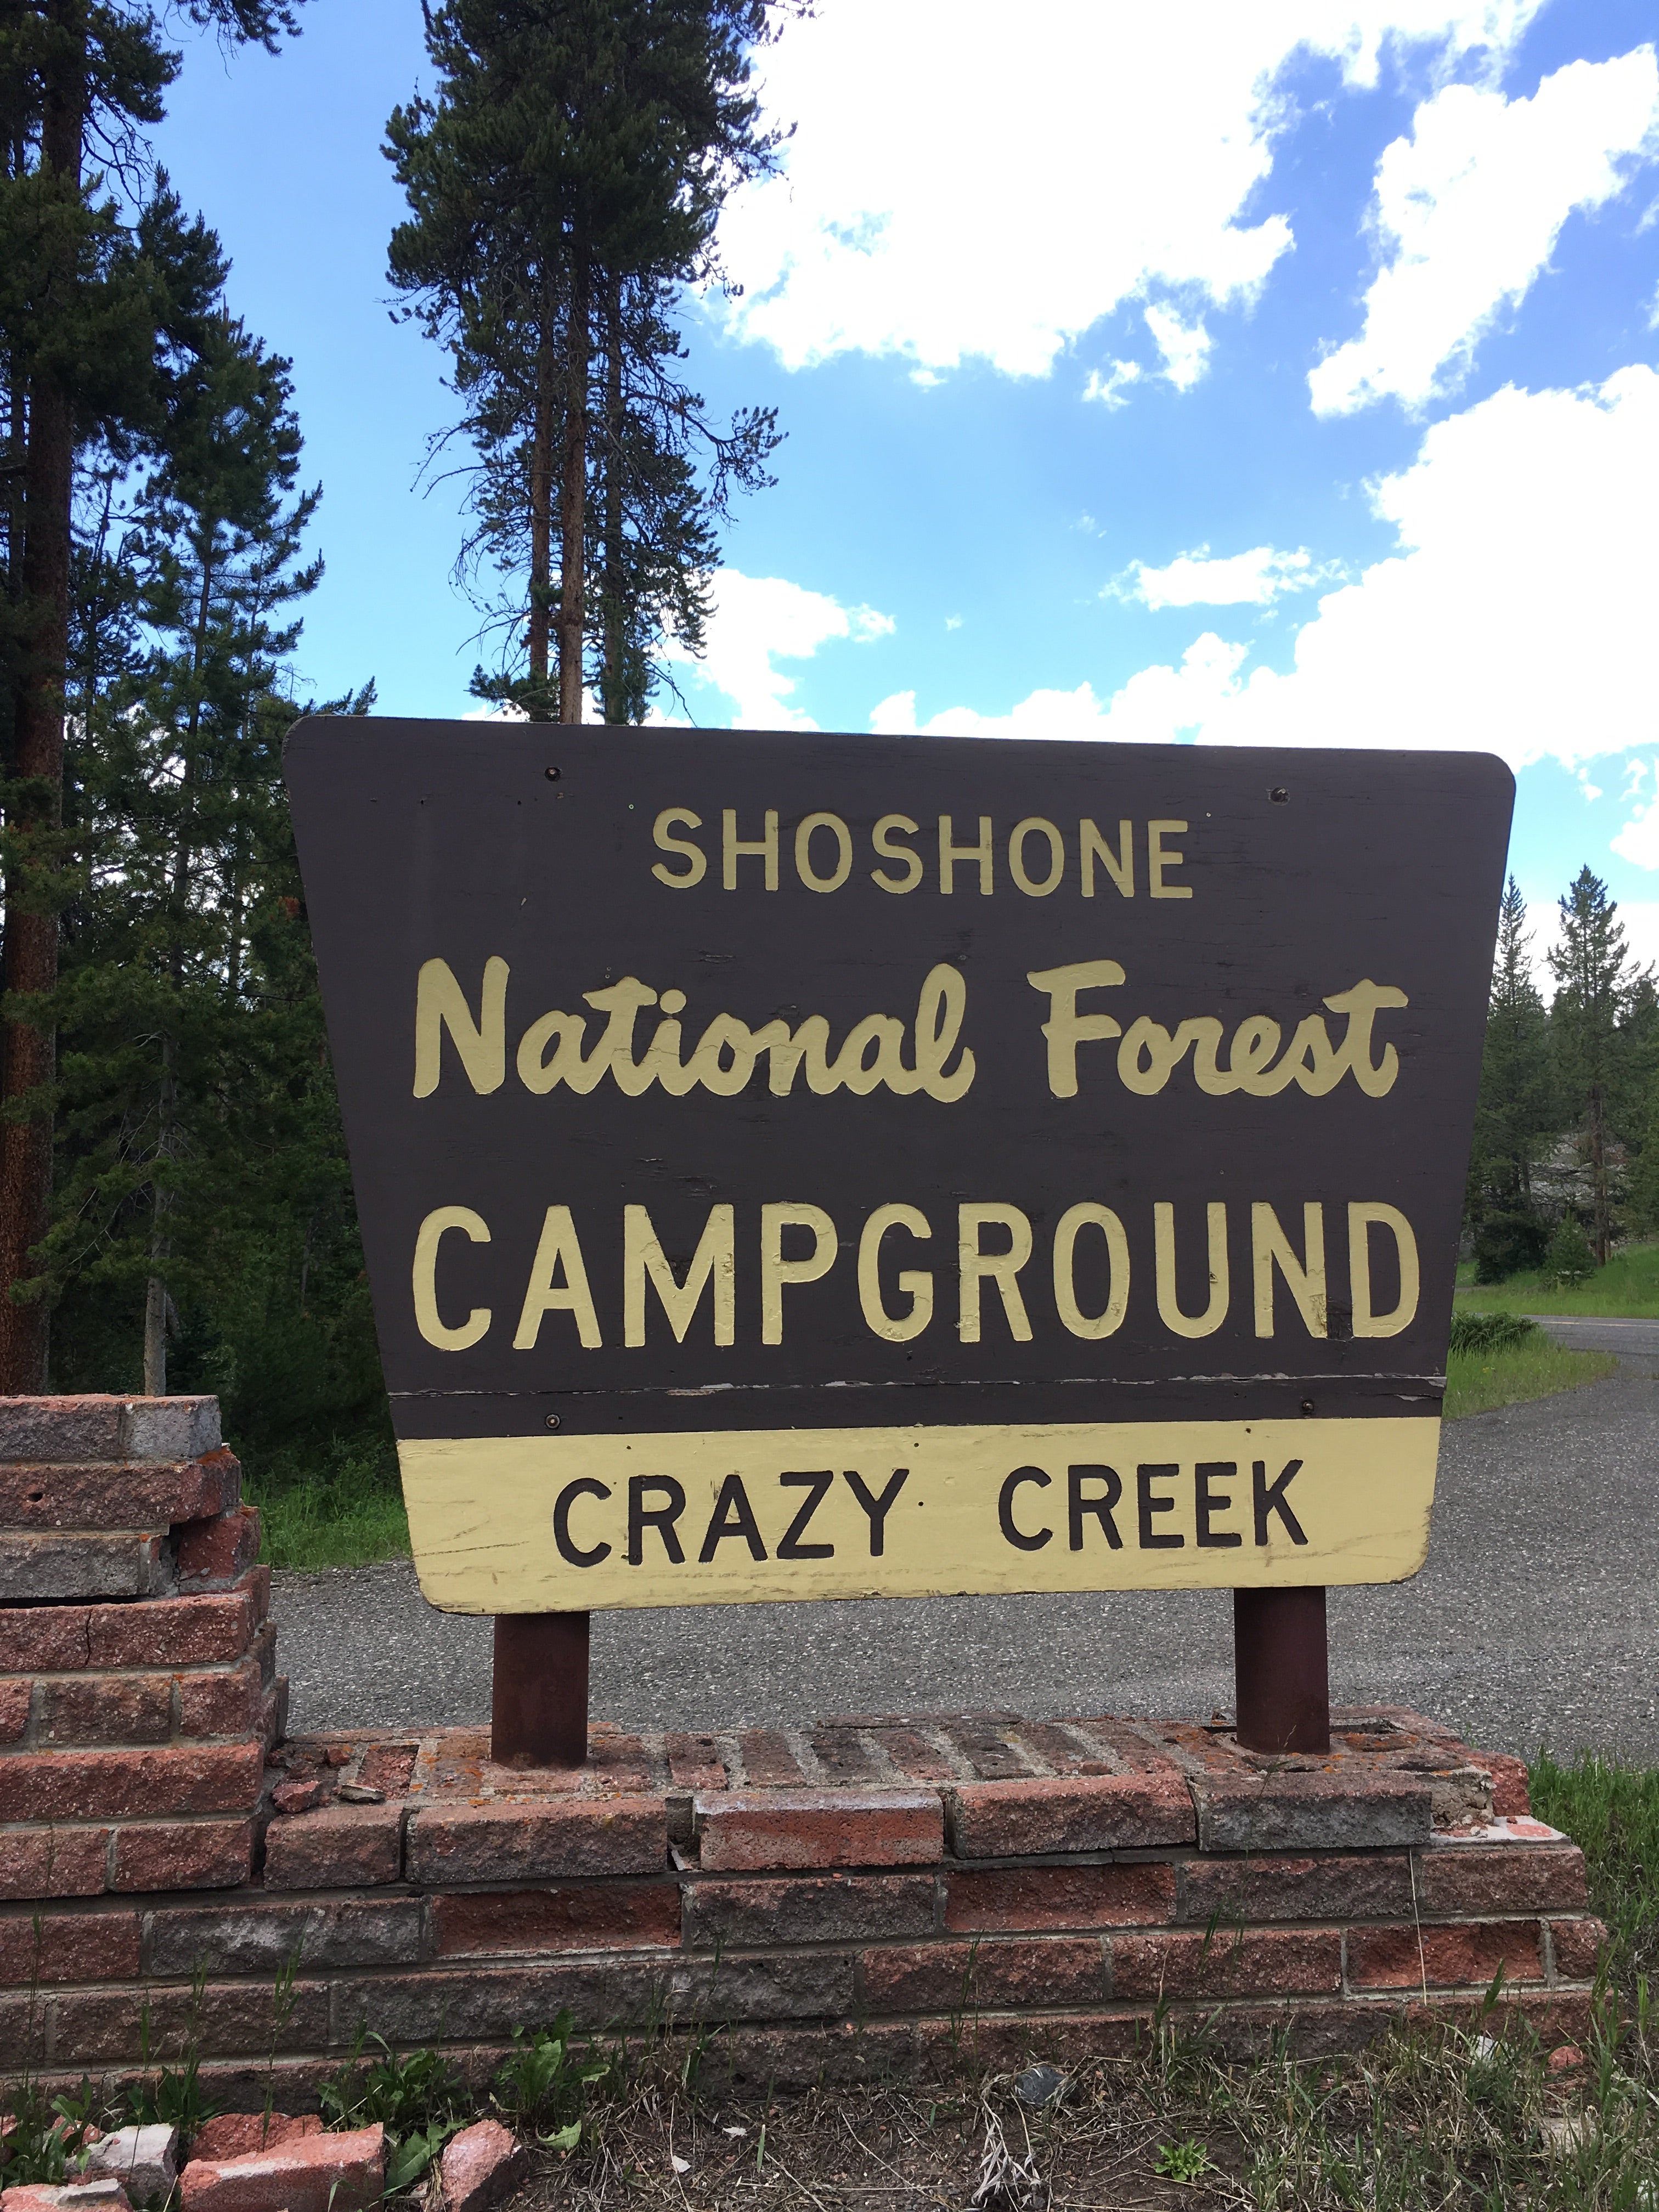 Camper submitted image from Crazy Creek - 3